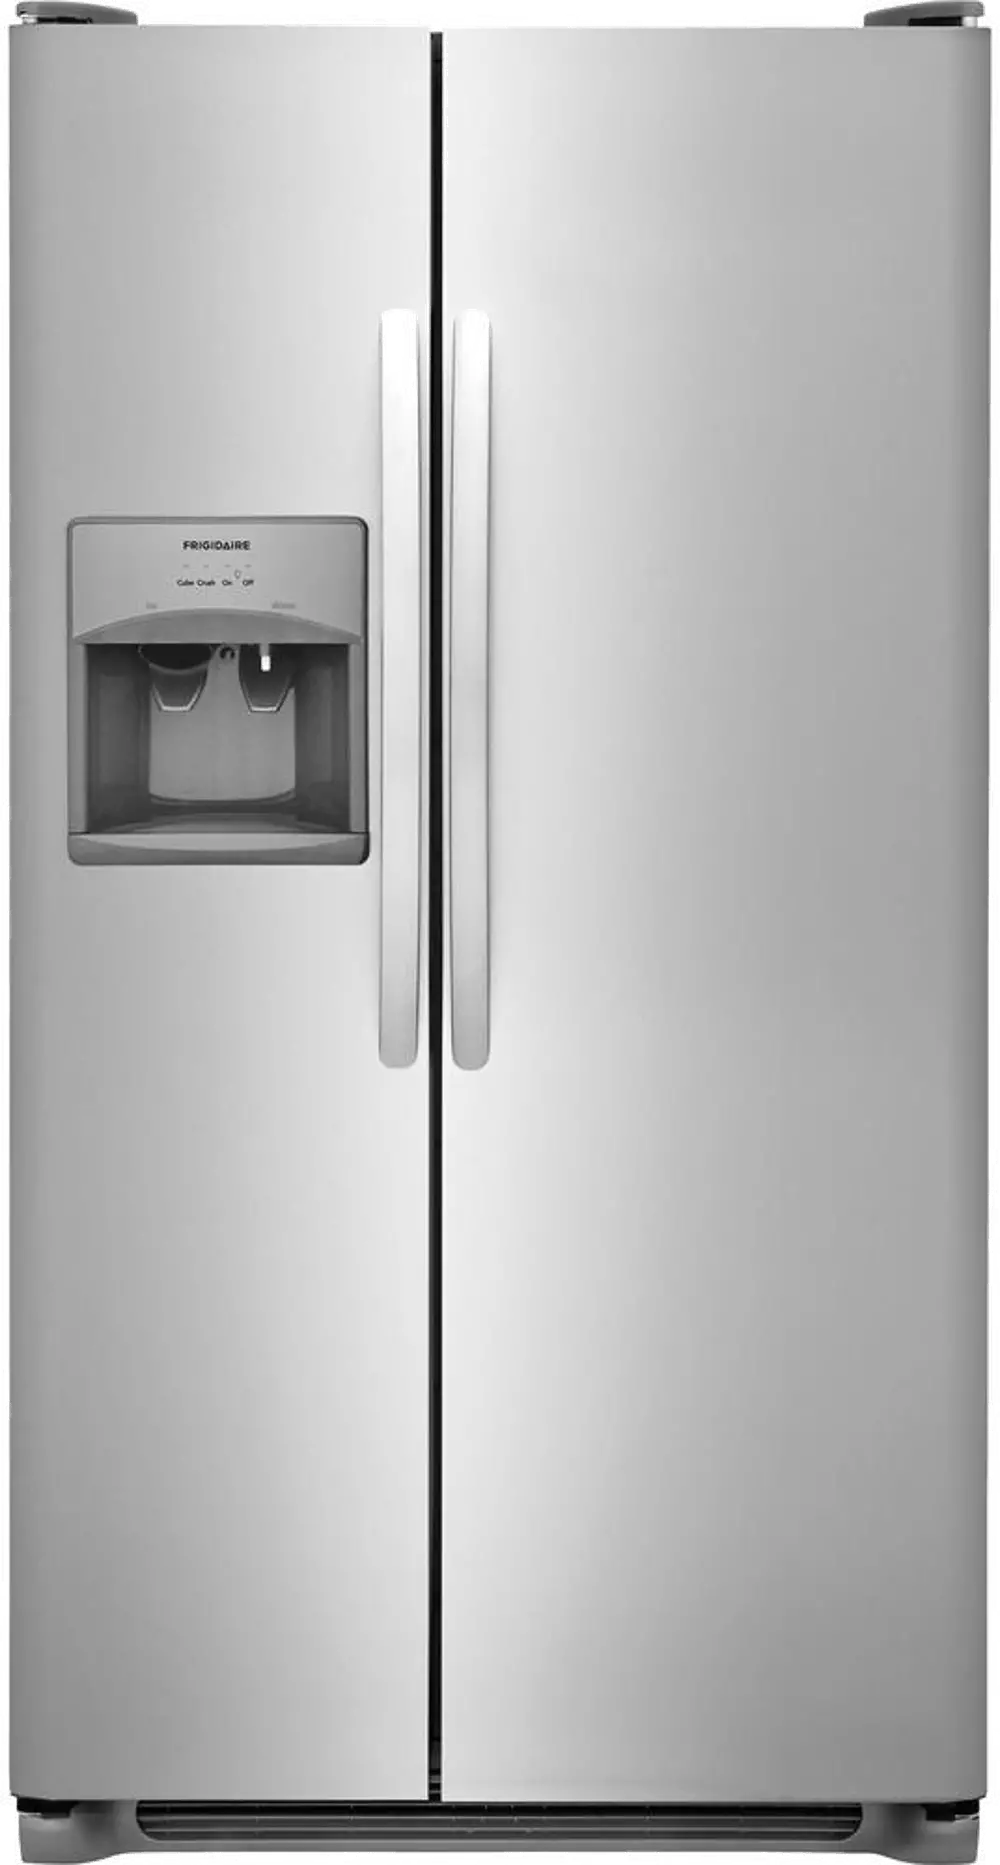 FFSS2315TS Frigidaire 22.1 cu. ft. Side by Side Refrigerator - 33 Inch Stainless Steel-1